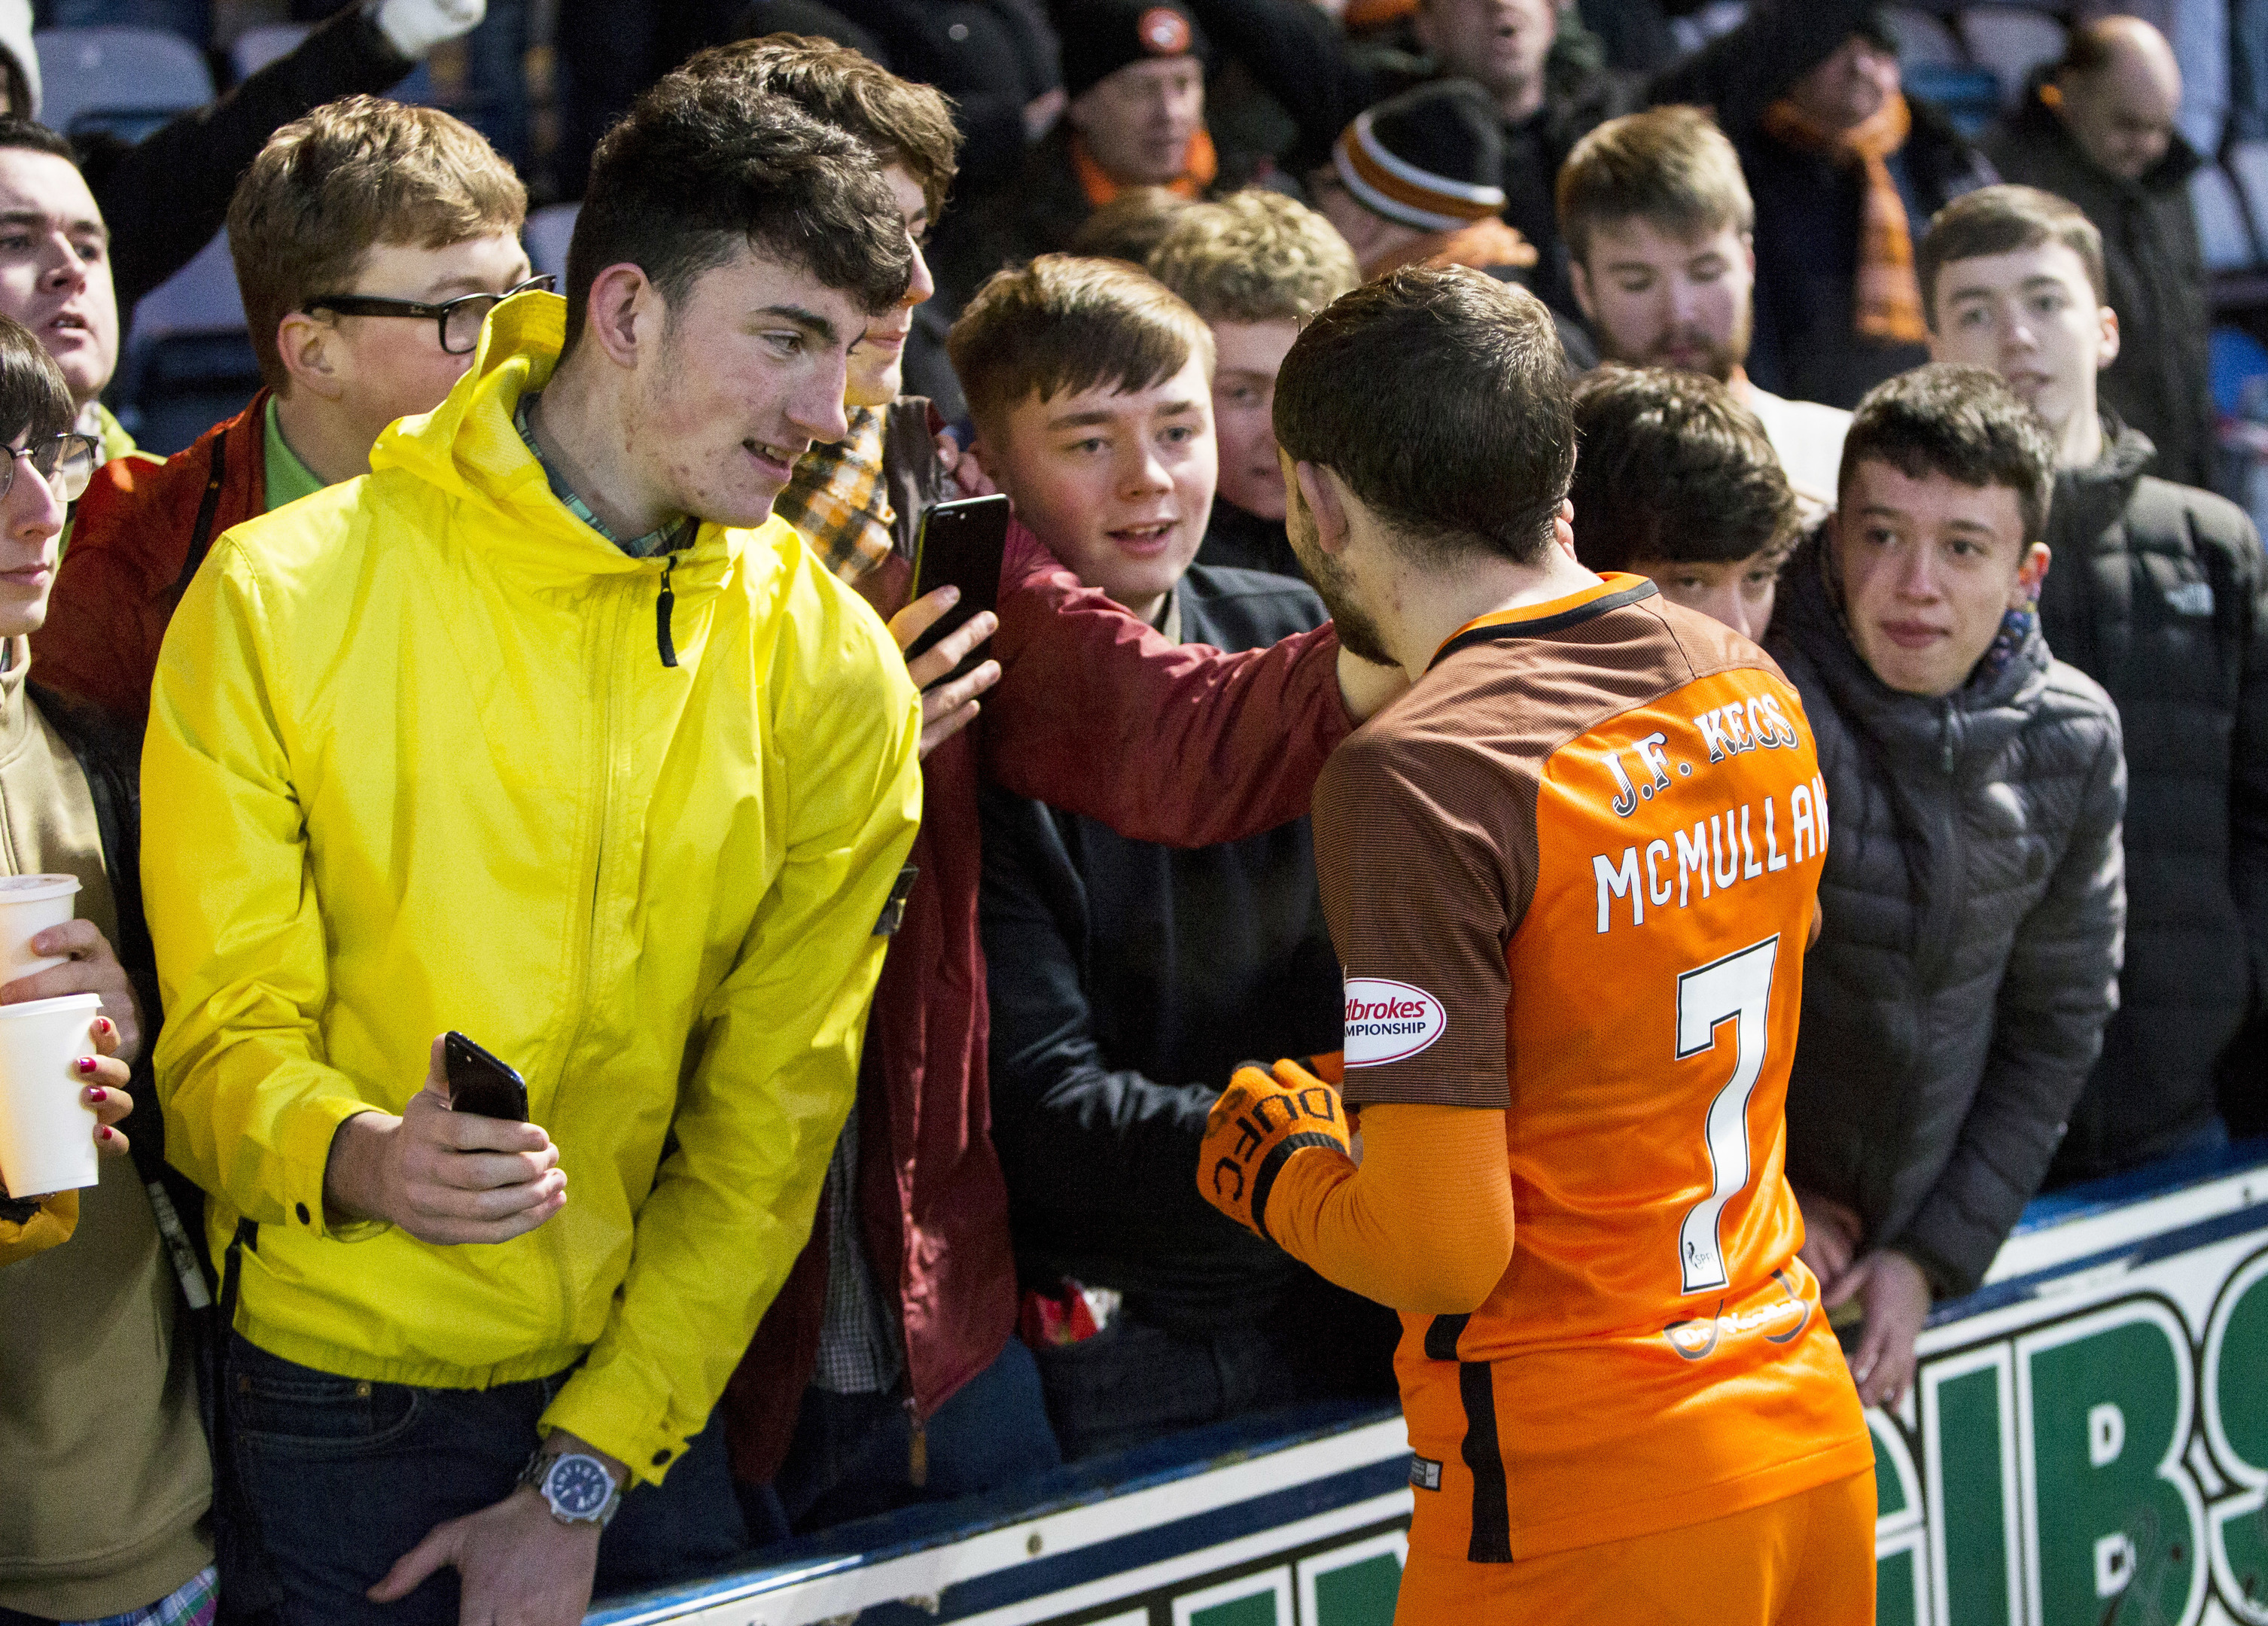 Dundee United's Paul McMullan speaks to the fans after the match is abandoned.